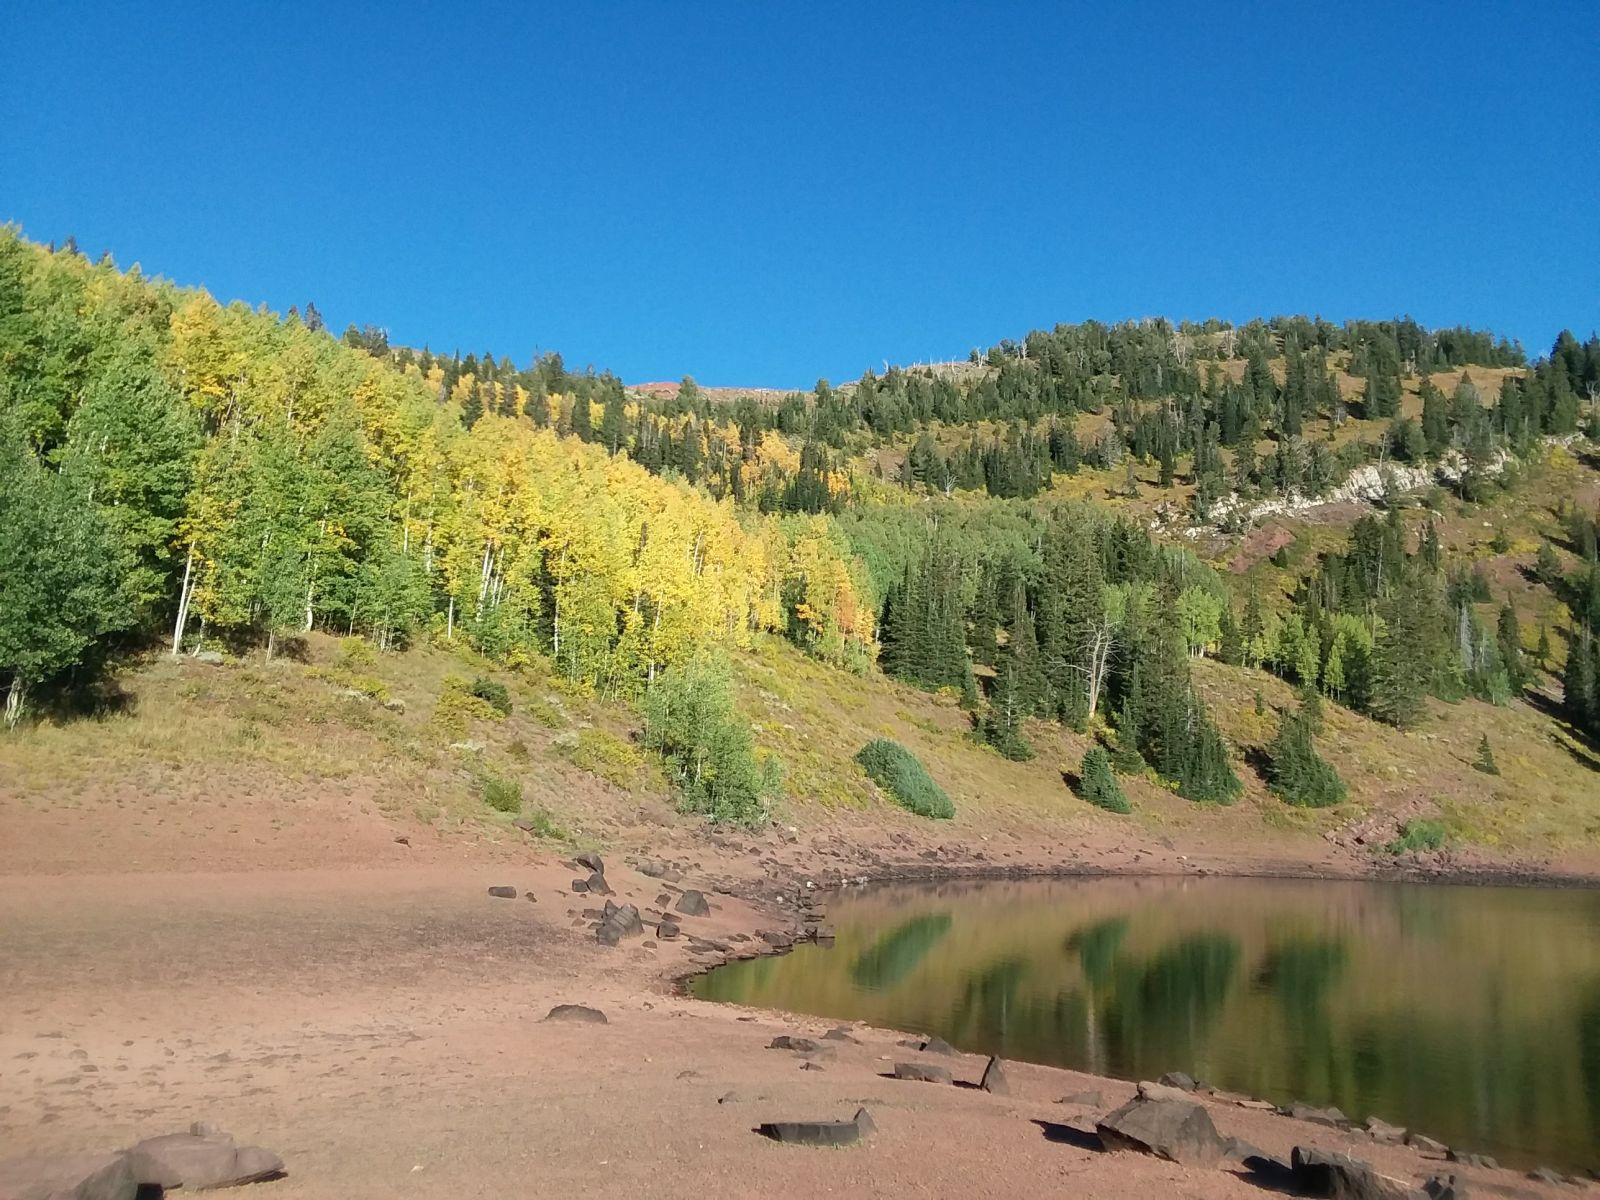 Was loving the fall colors and cooler air up there at around 9,200 feet.